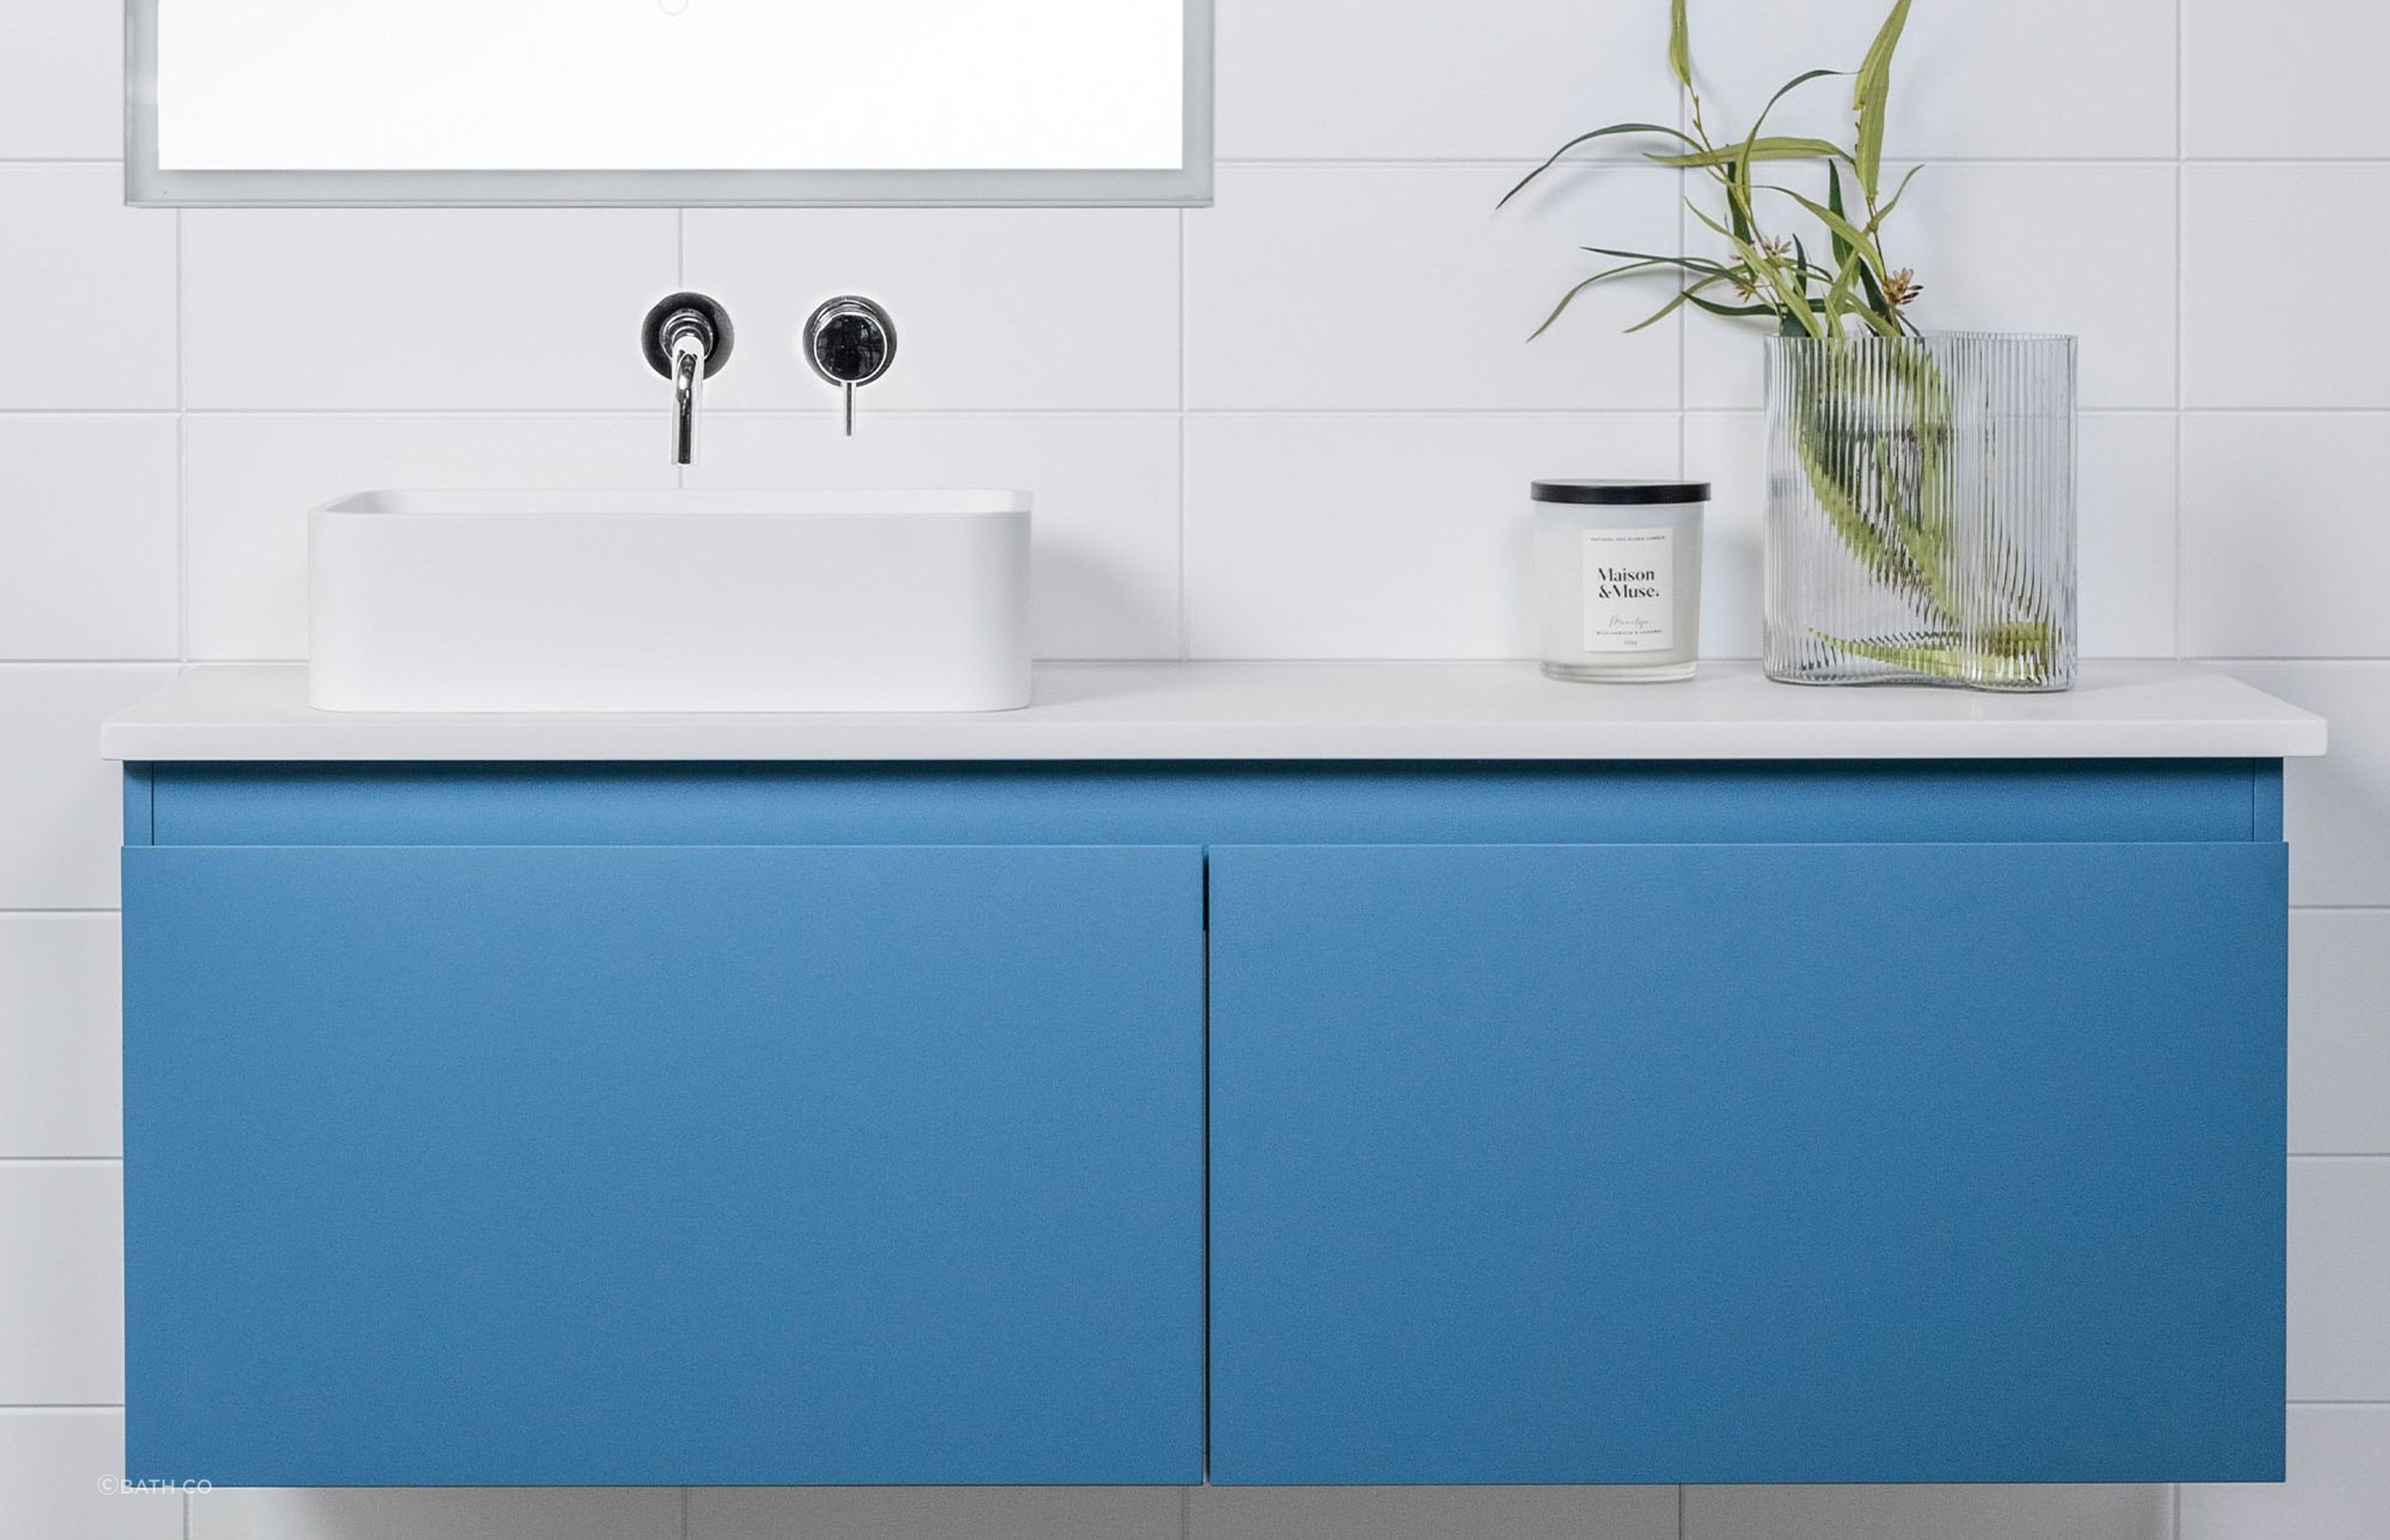 Bold colour choices, like the brilliant blue of the Tablo Slim Bathroom Vanity can be a lot of eye-popping fun.